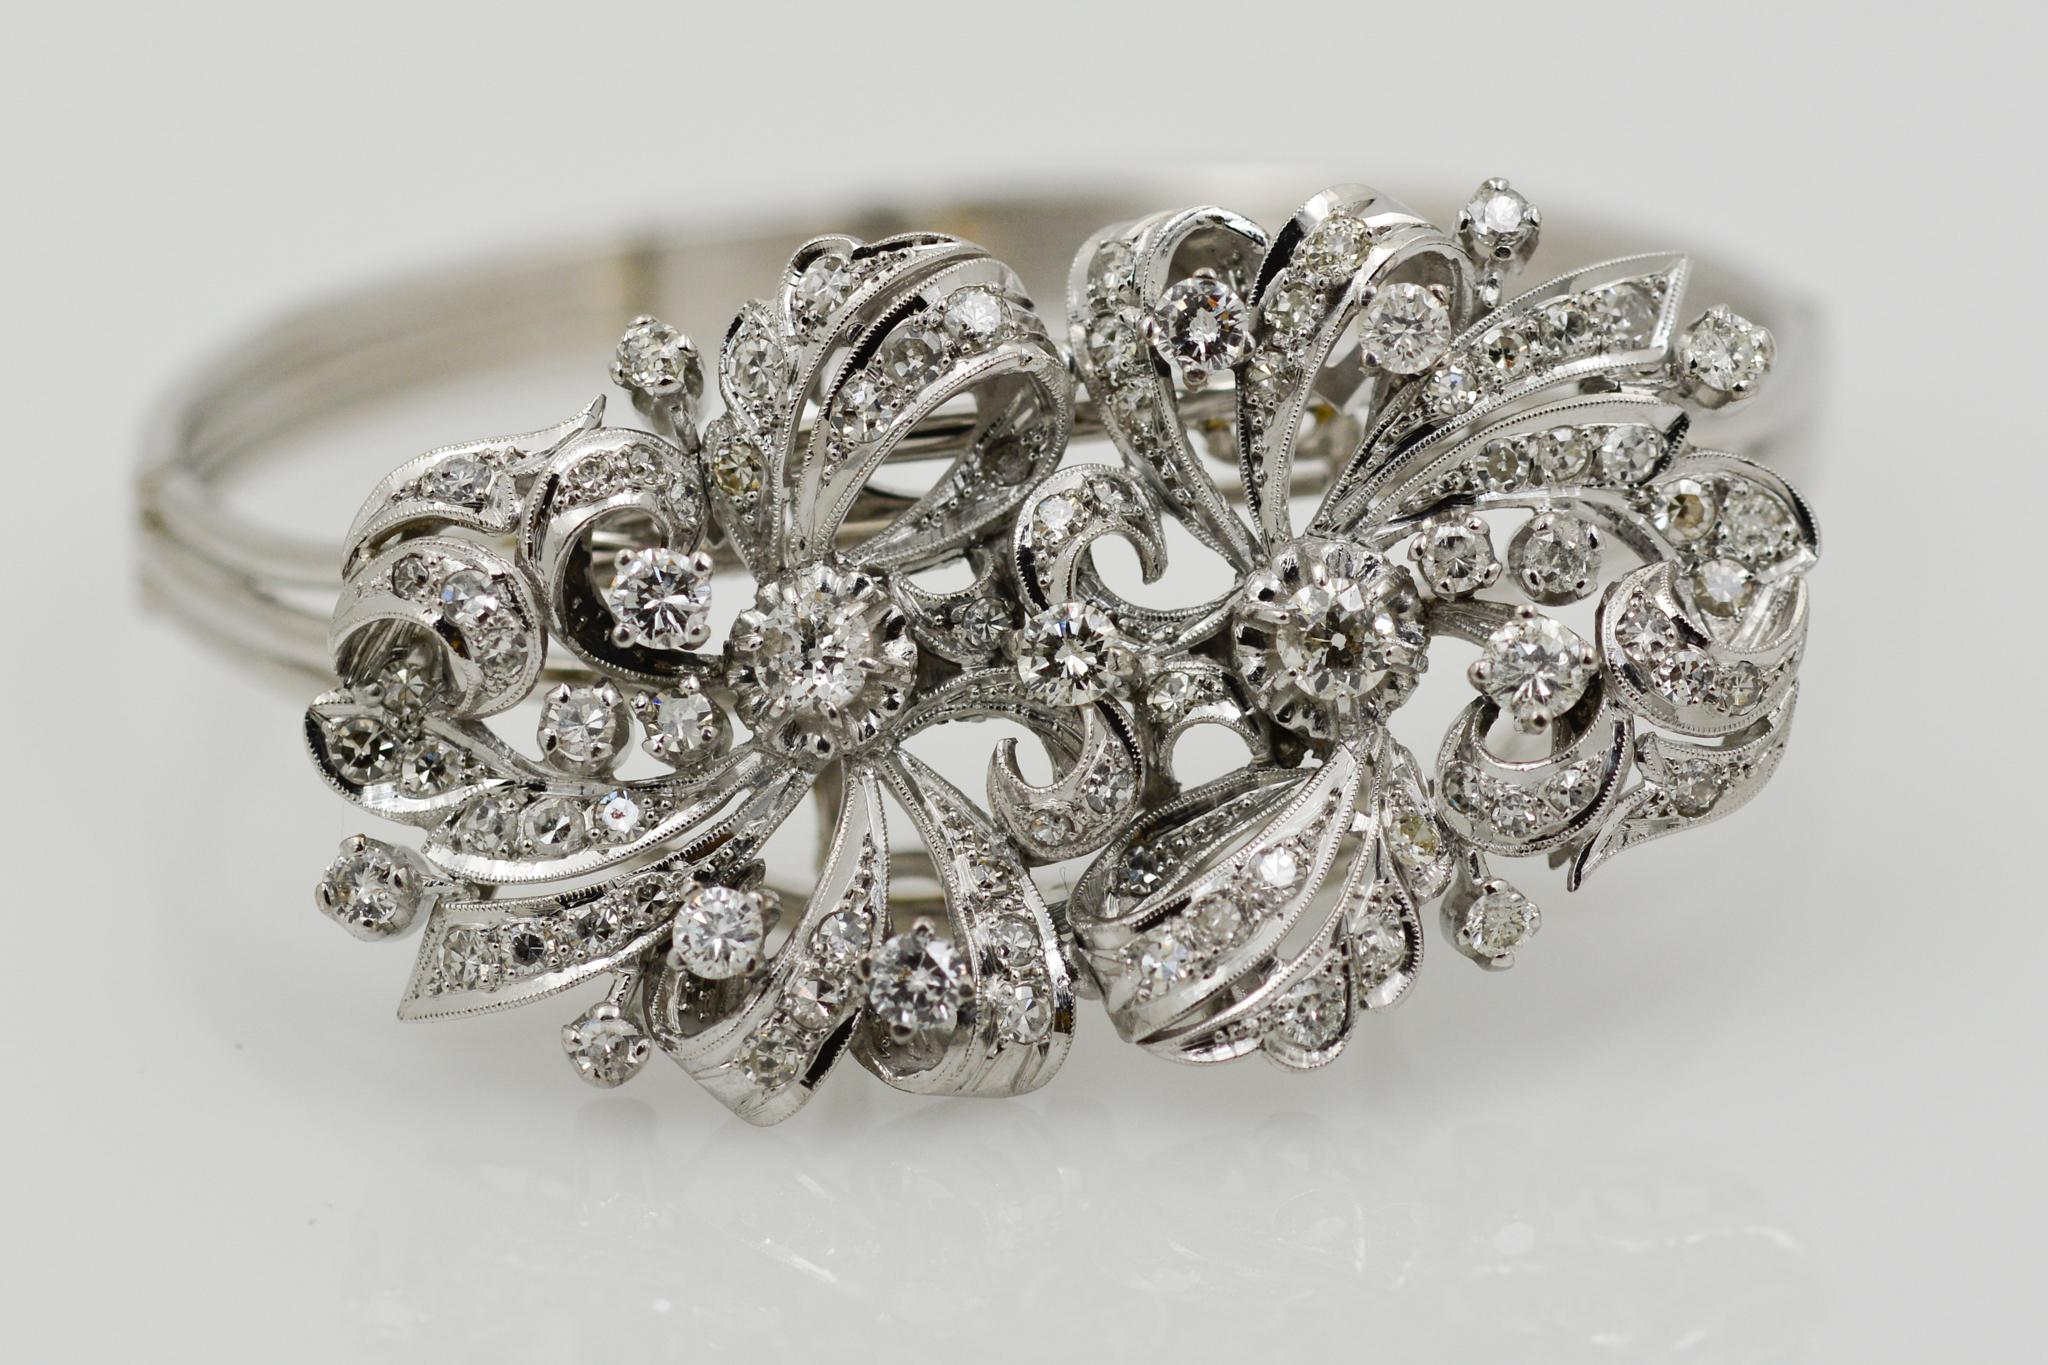 Exclusively from the Eiseman Estate Jewelry Collection, this 14k white gold and platinum bracelet and pin combination features 72 single cut and 17 round brilliant cut diamonds (5.34ctw H-I SI-I). The pin can be worn attached to the 14k white gold